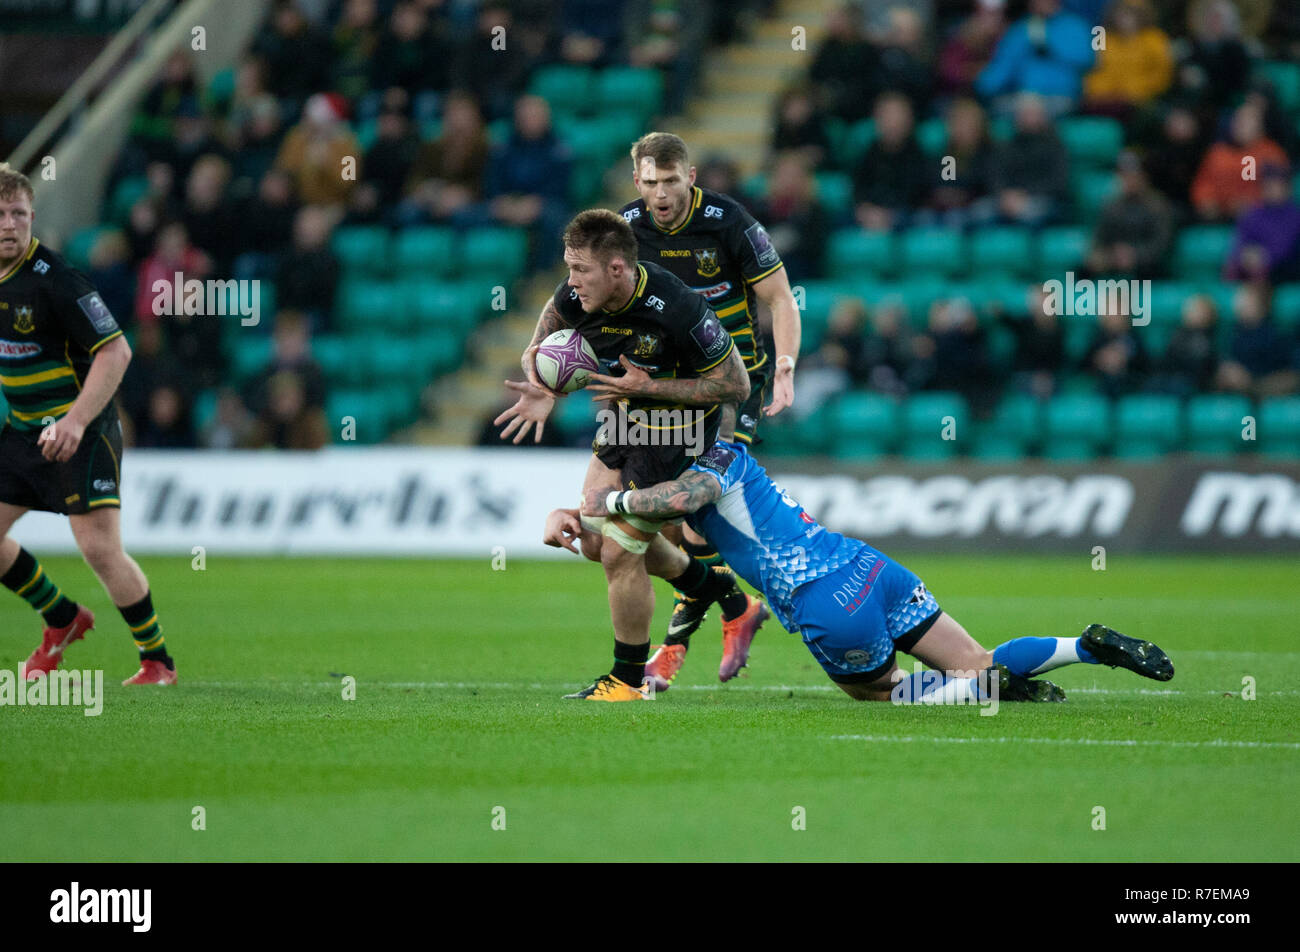 Northampton, UK. 8th December 2018. Teimana Harrison of Northampton Saints runs with the ball during the European Rugby Challenge Cup match between Northampton Saints and Dragons. Andrew Taylor/Alamy Live News Stock Photo